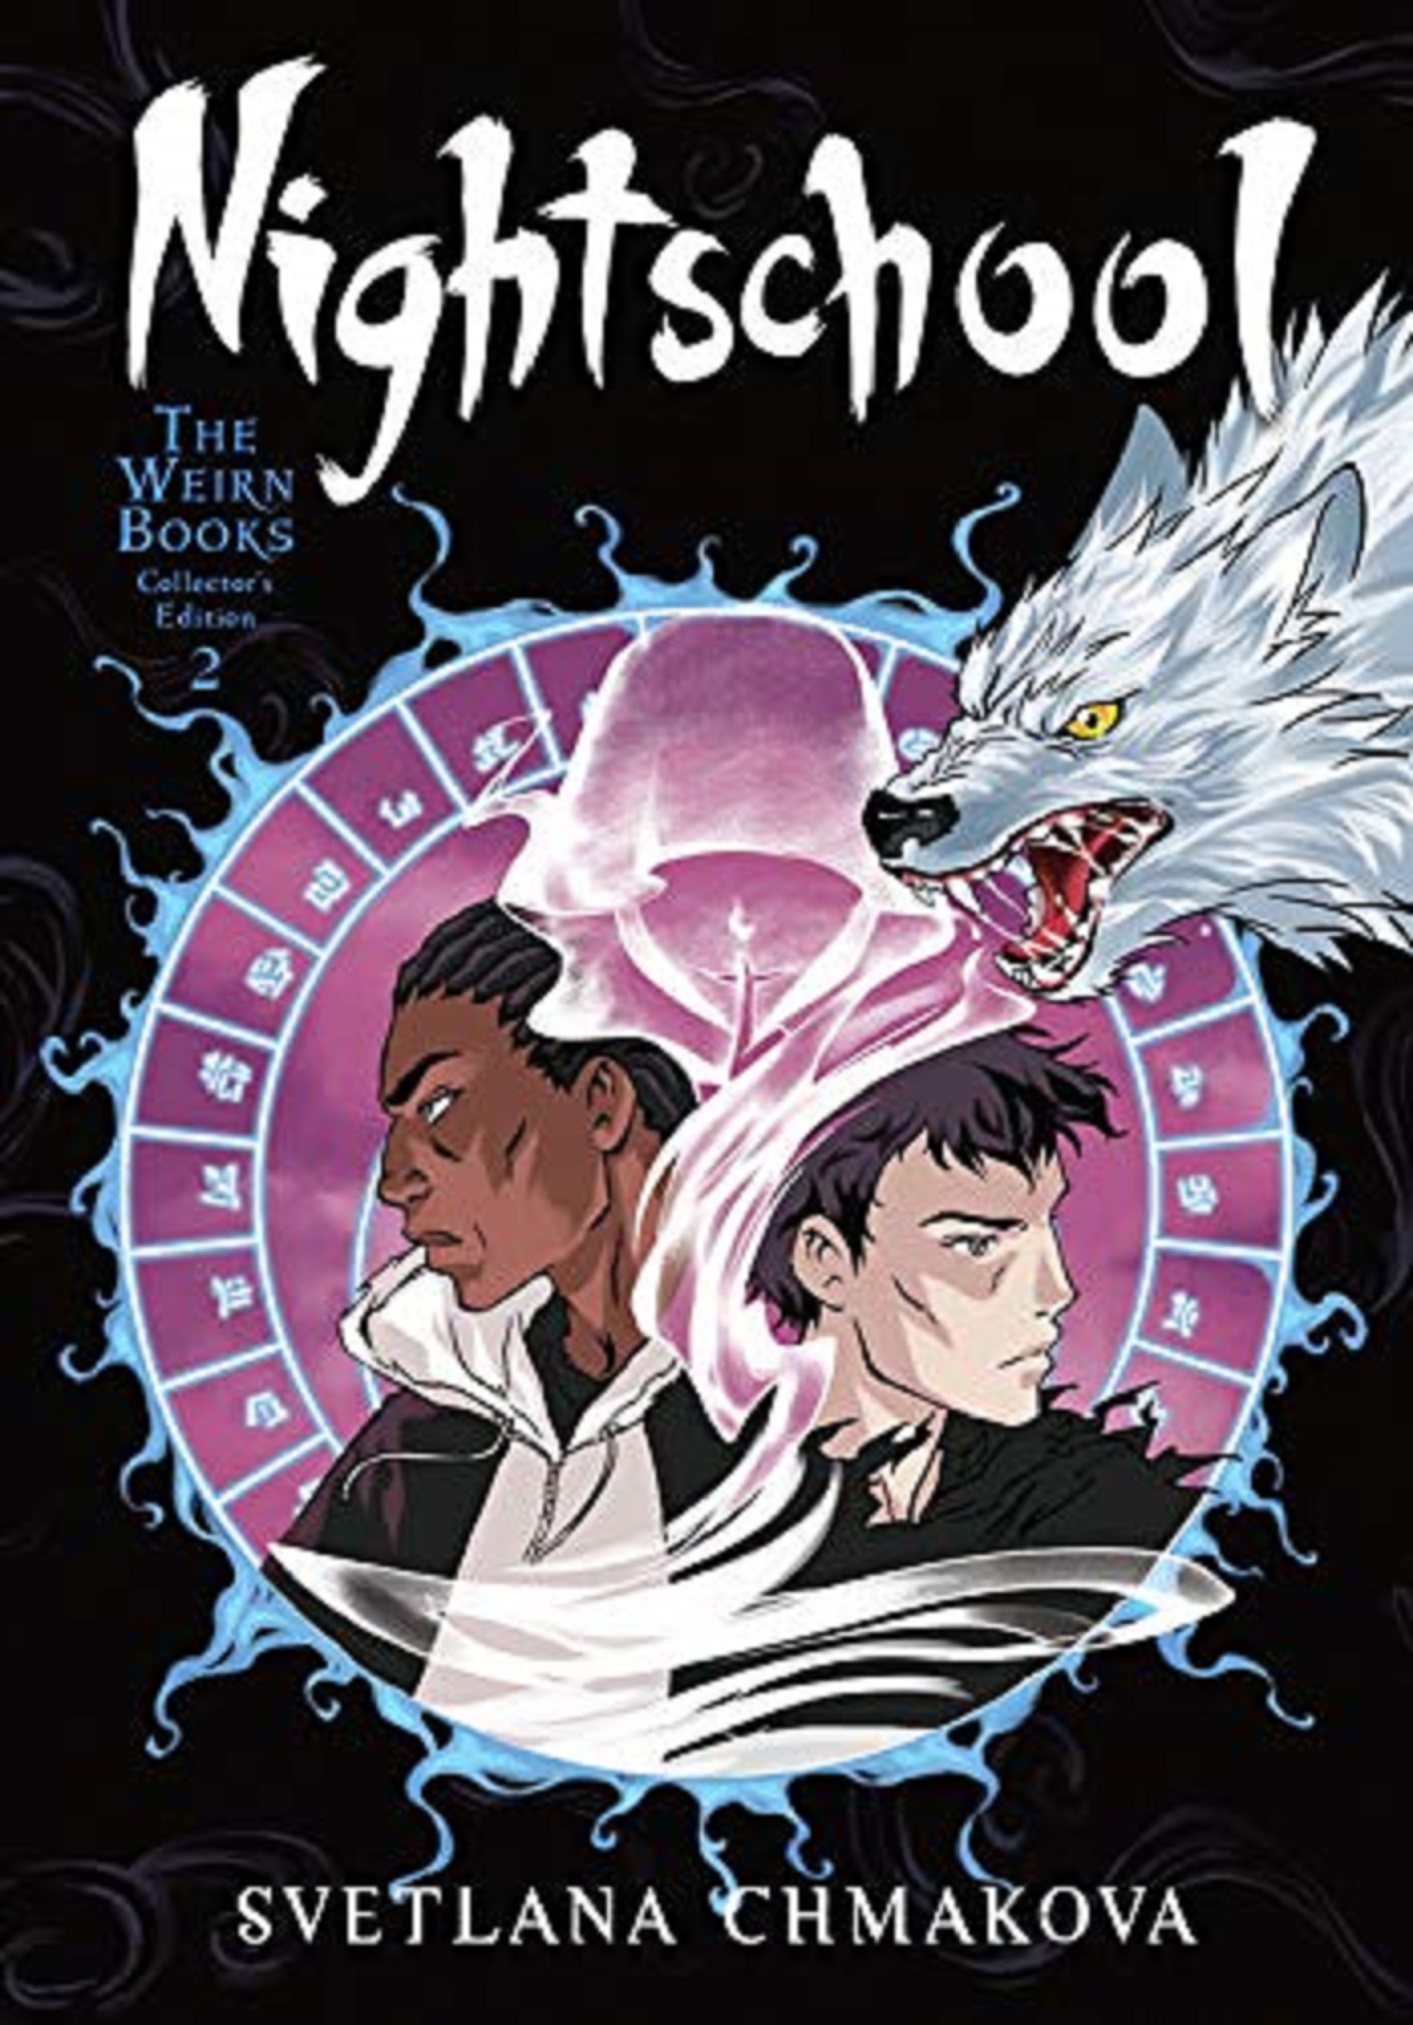 Nightschool: The Weirn Books Collector&#039;s Edition - Volume 2